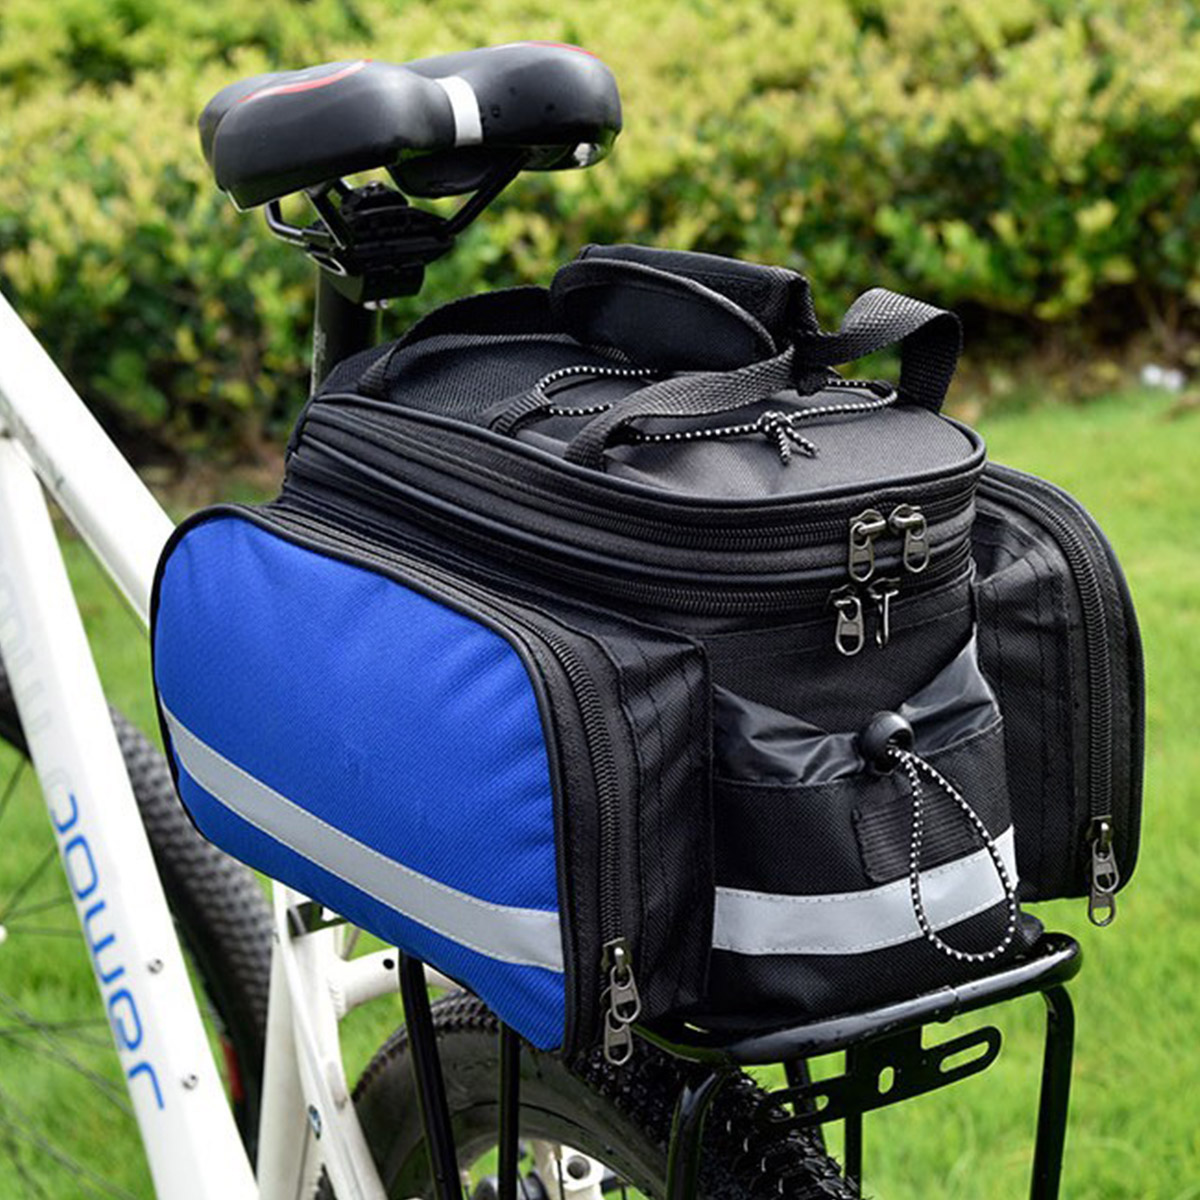 27L-Bicycle-Riding-Package-Large-Capacity-Waterproof-Reflective-Strips-Outdoor-Riding-Bag-1874551-12